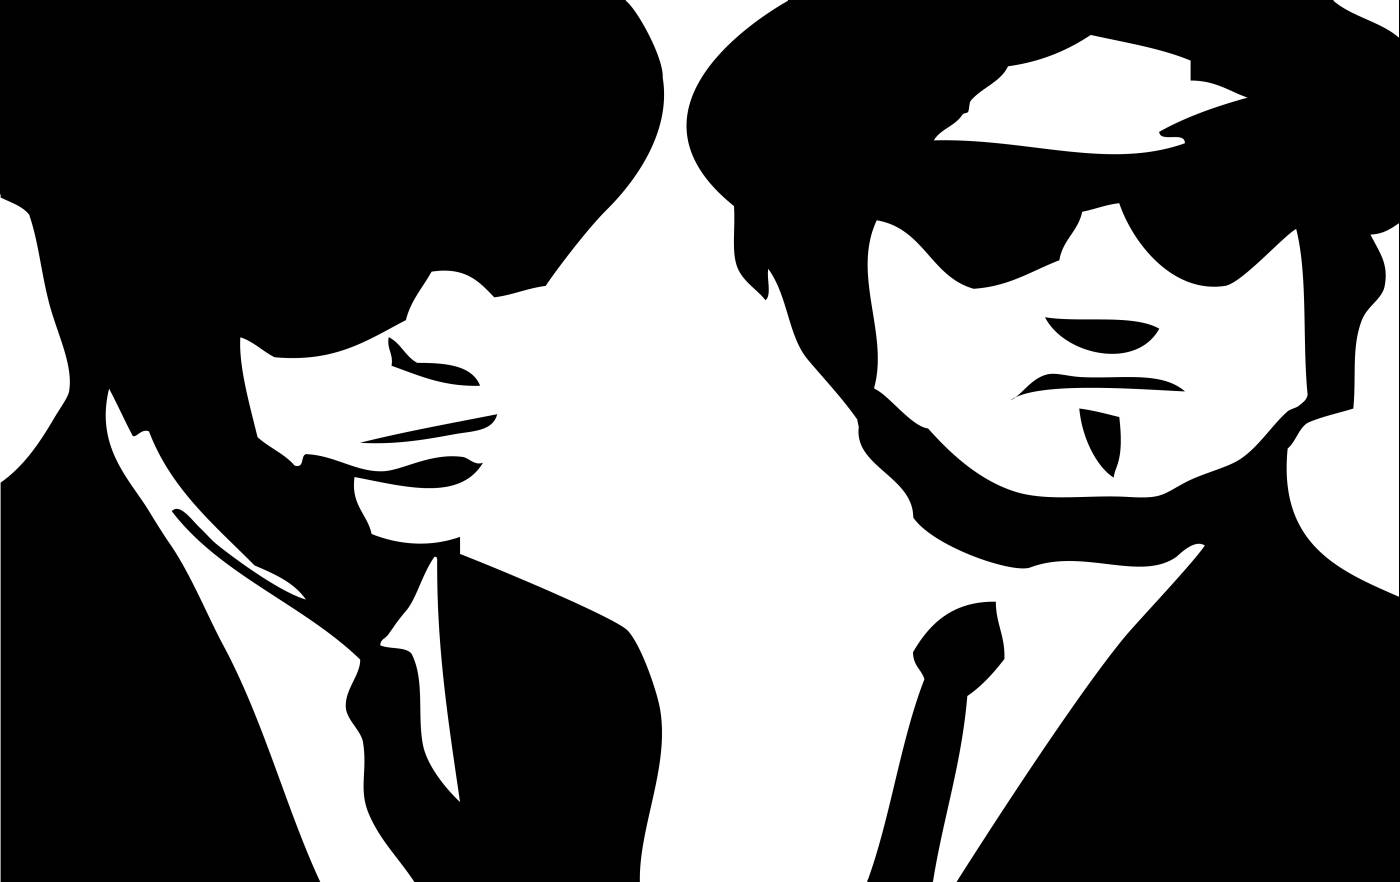 The Blues Brothers Computer Wallpapers, Desktop Backgrounds